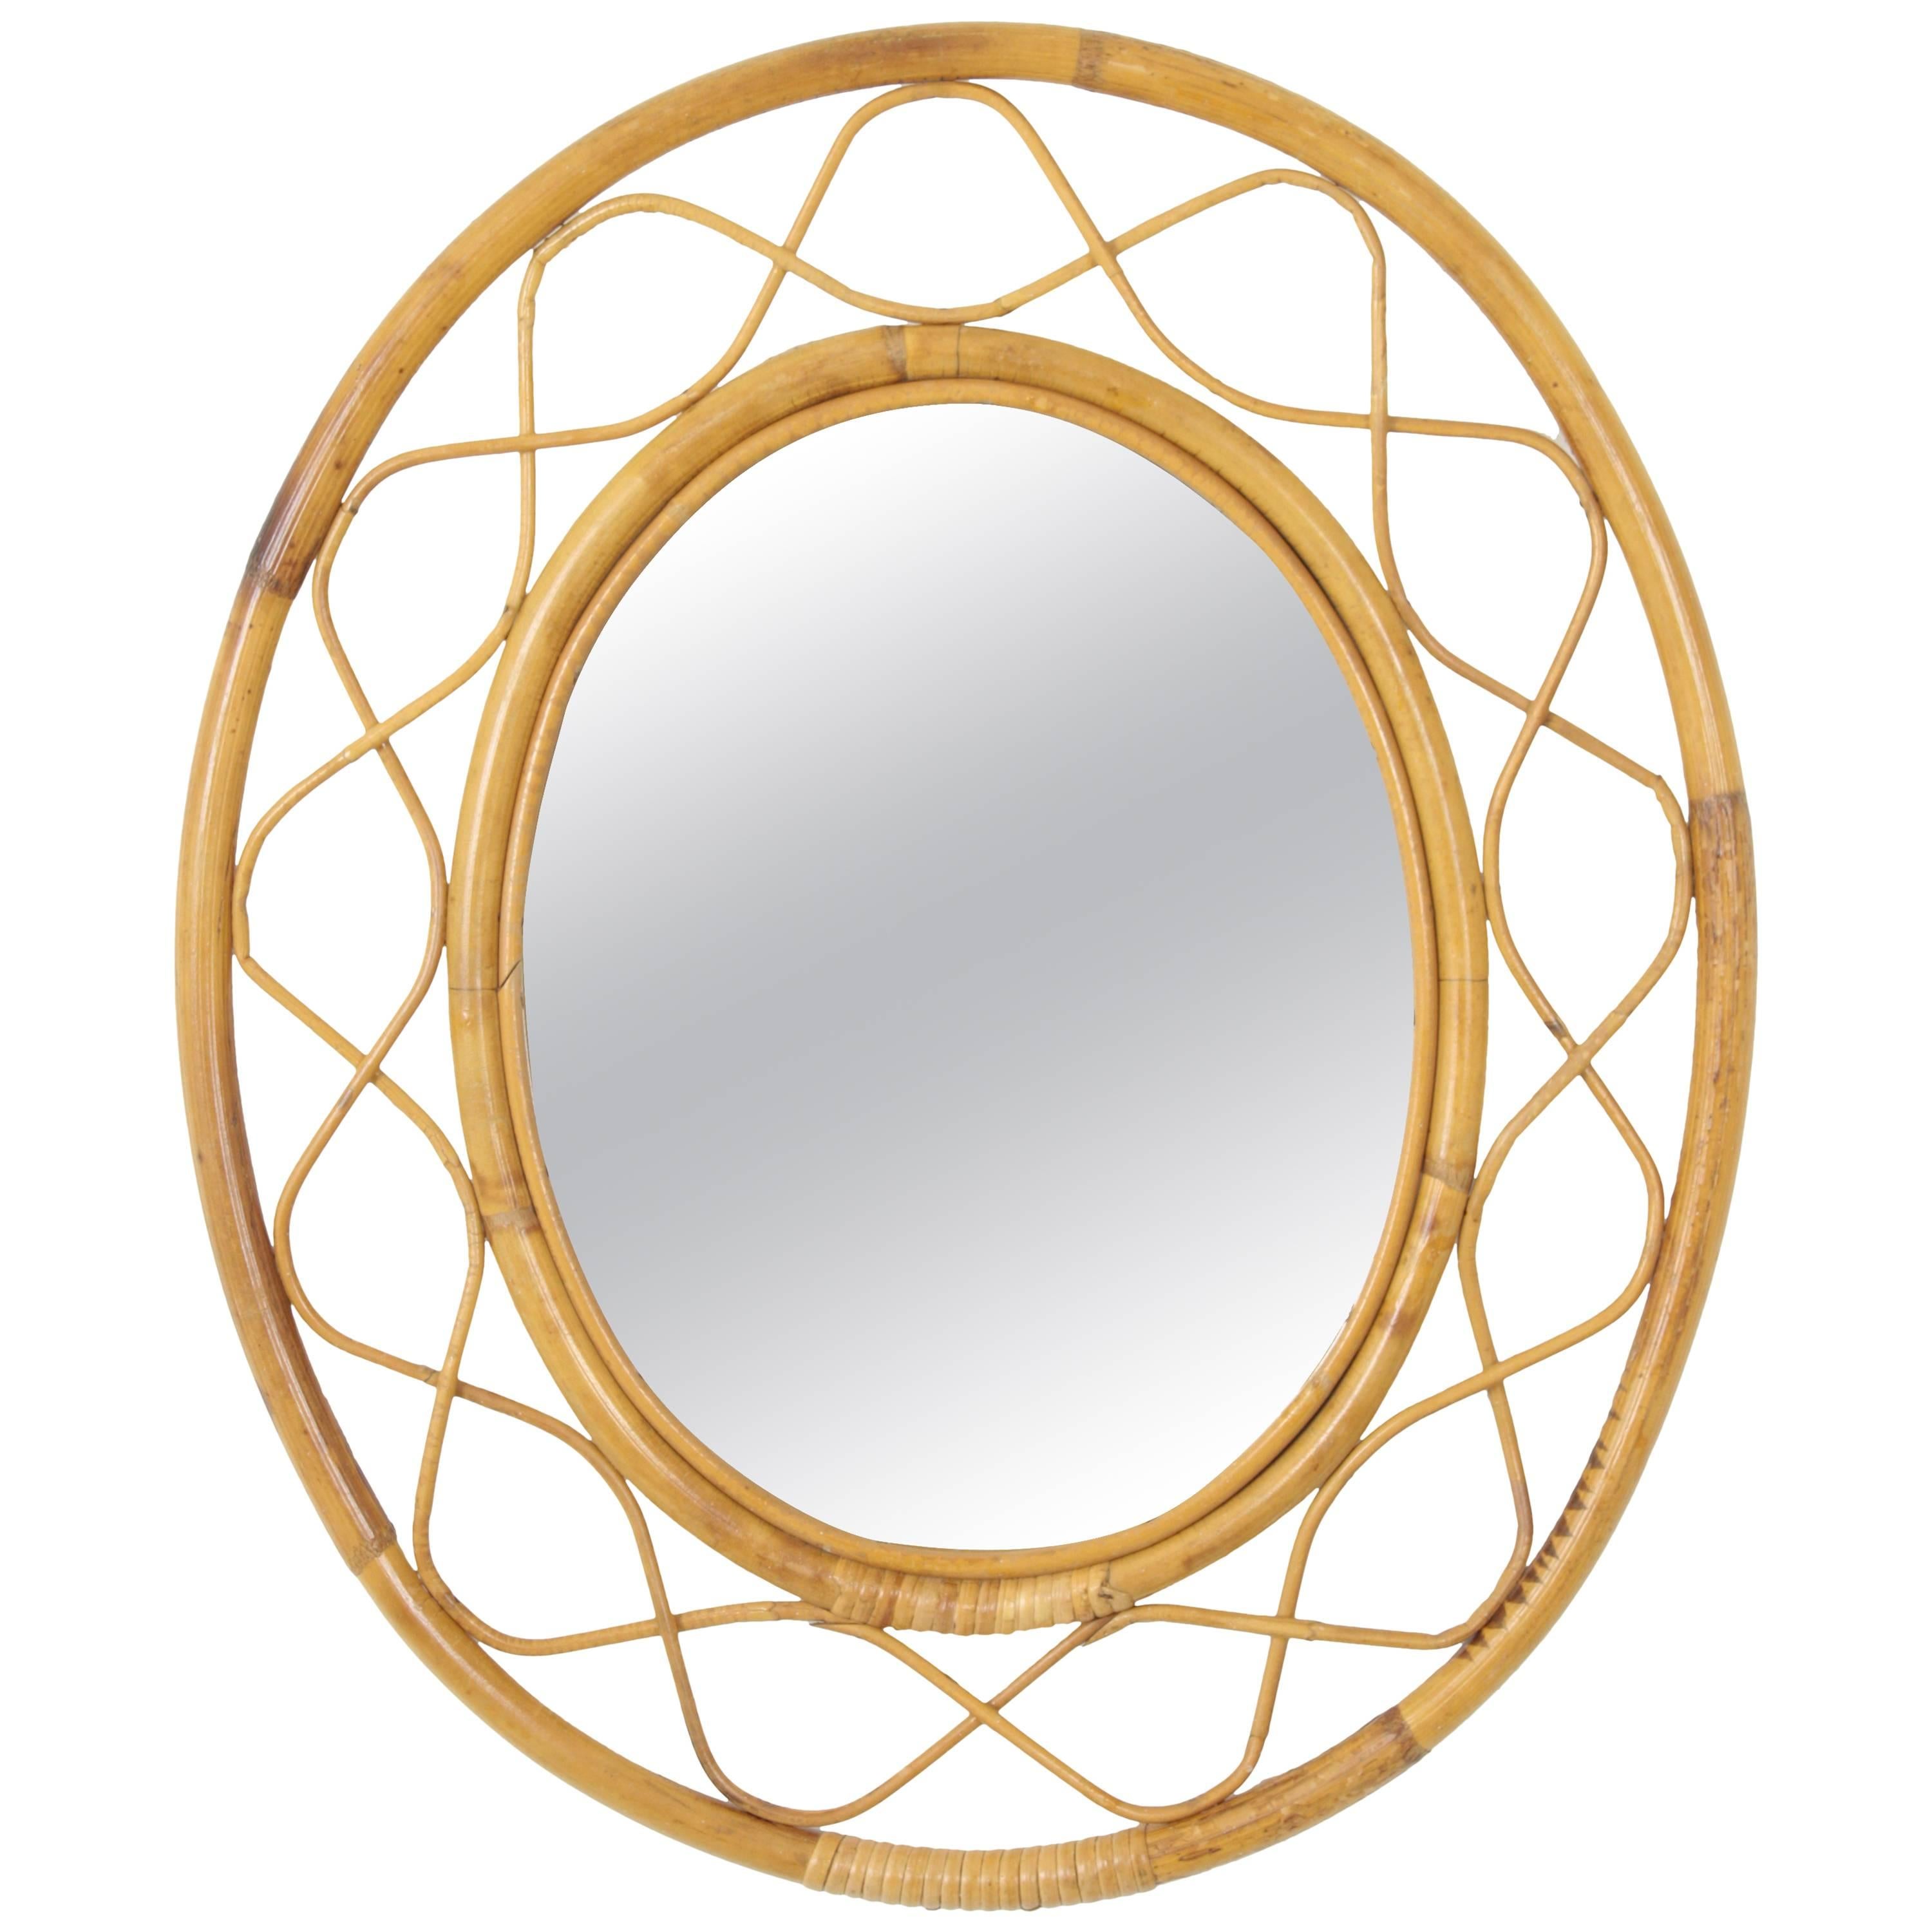 Jean Royère Style French Riviera Bamboo and Rattan Oval Mirror